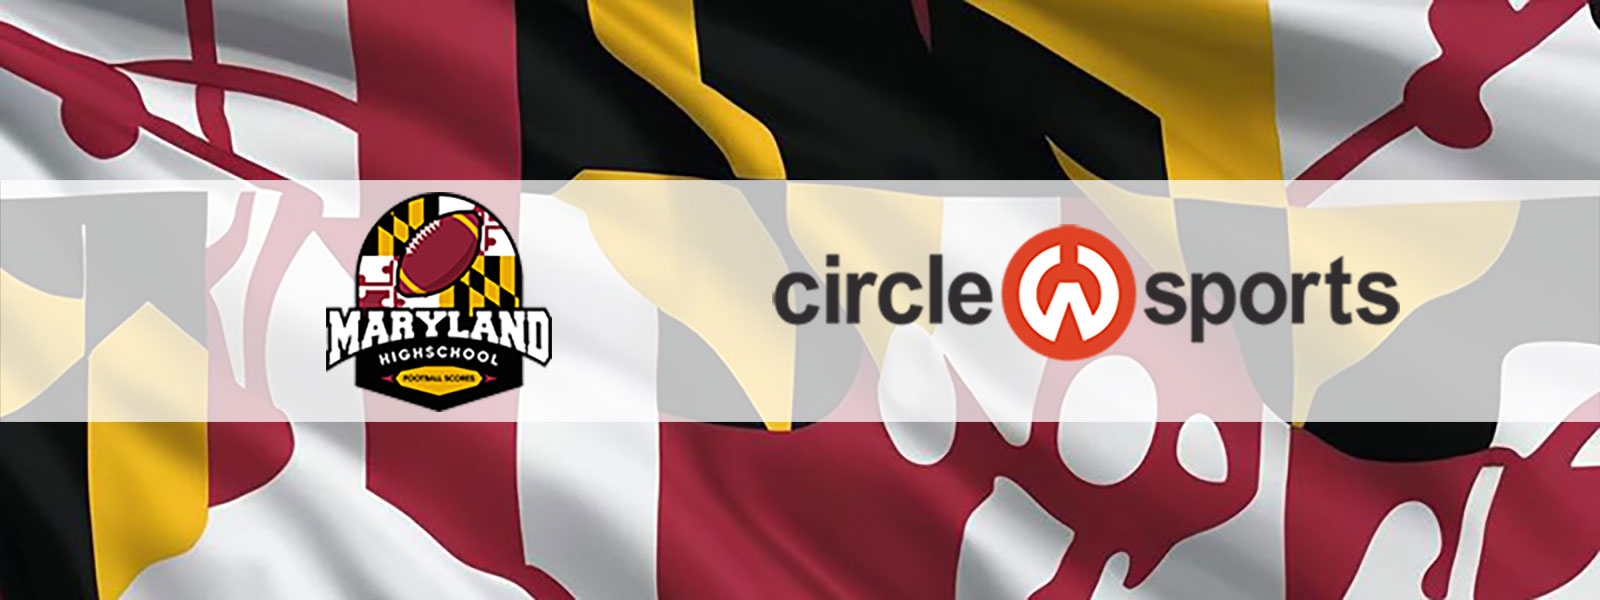 Maryland High School Football Scores And Circle W Sports Partner Up For New Website